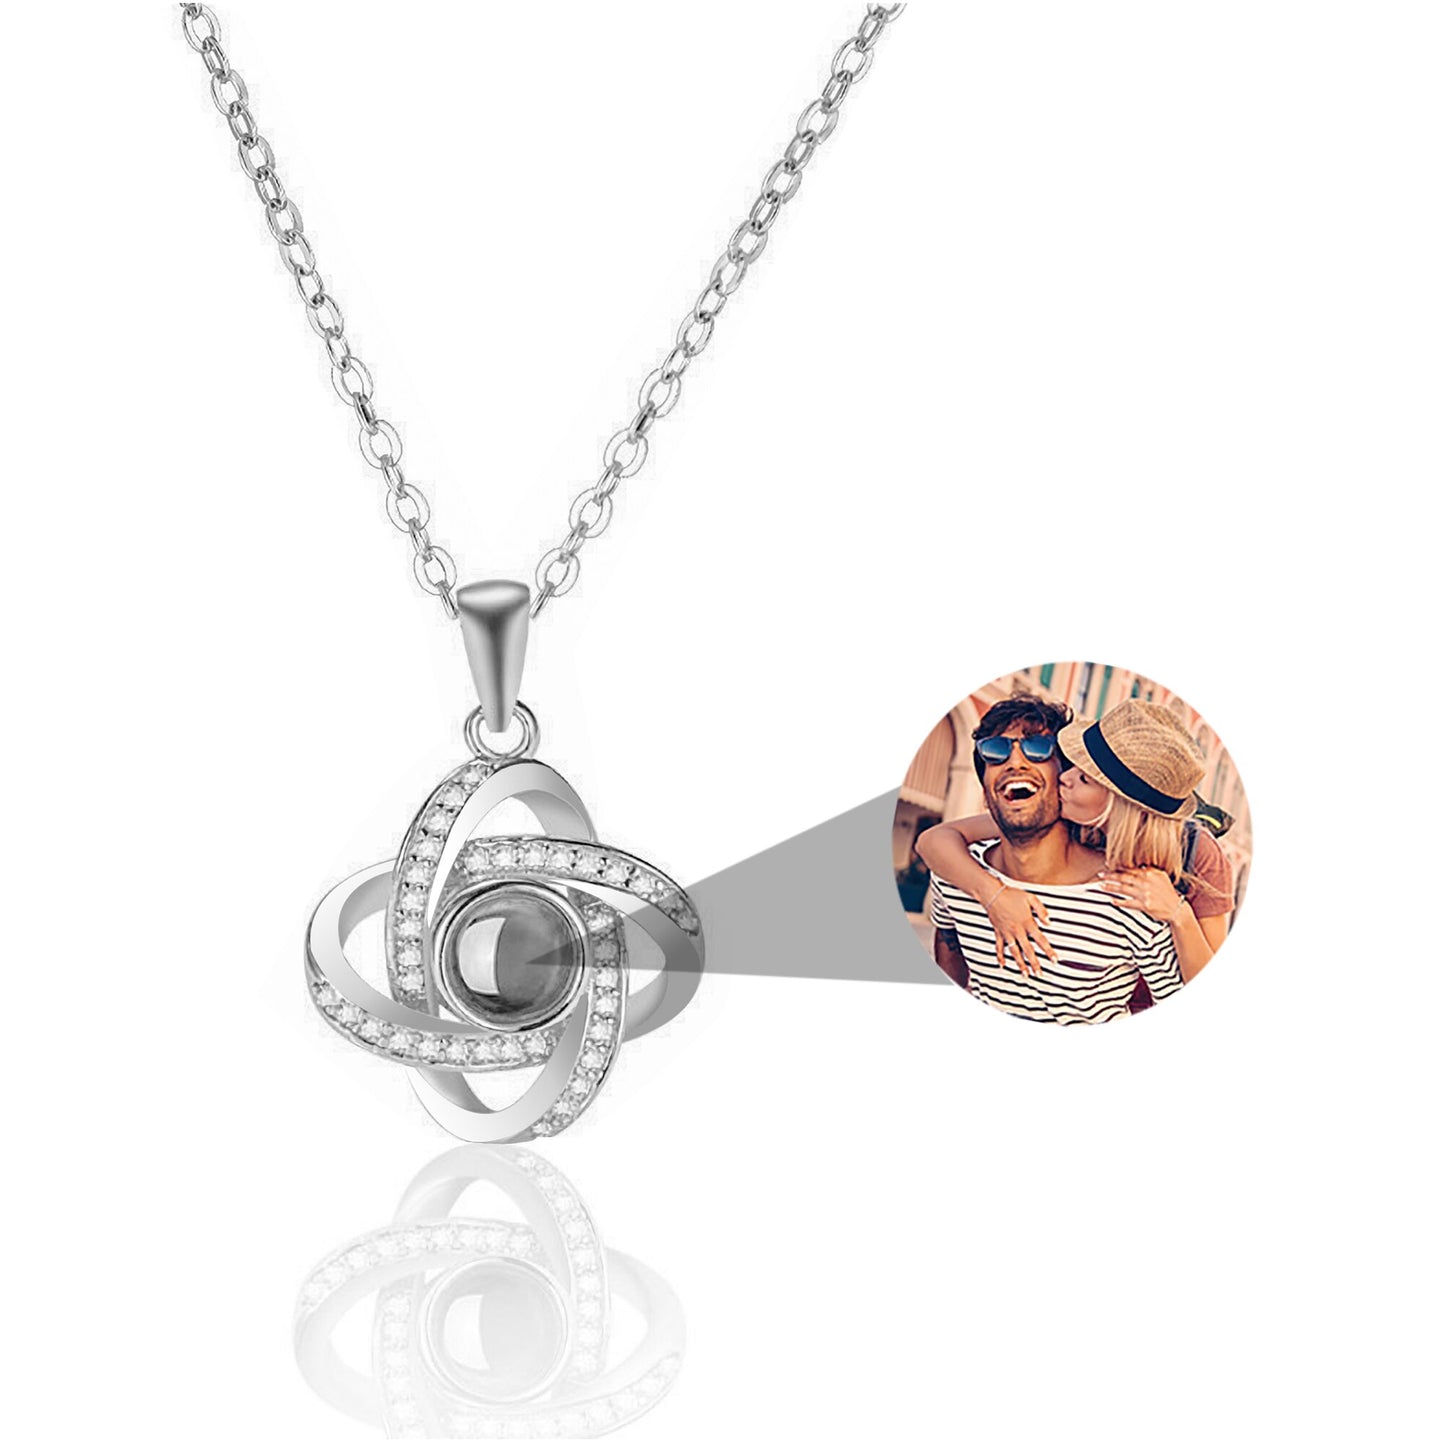 Personalized 4 Swirl Projection Necklace